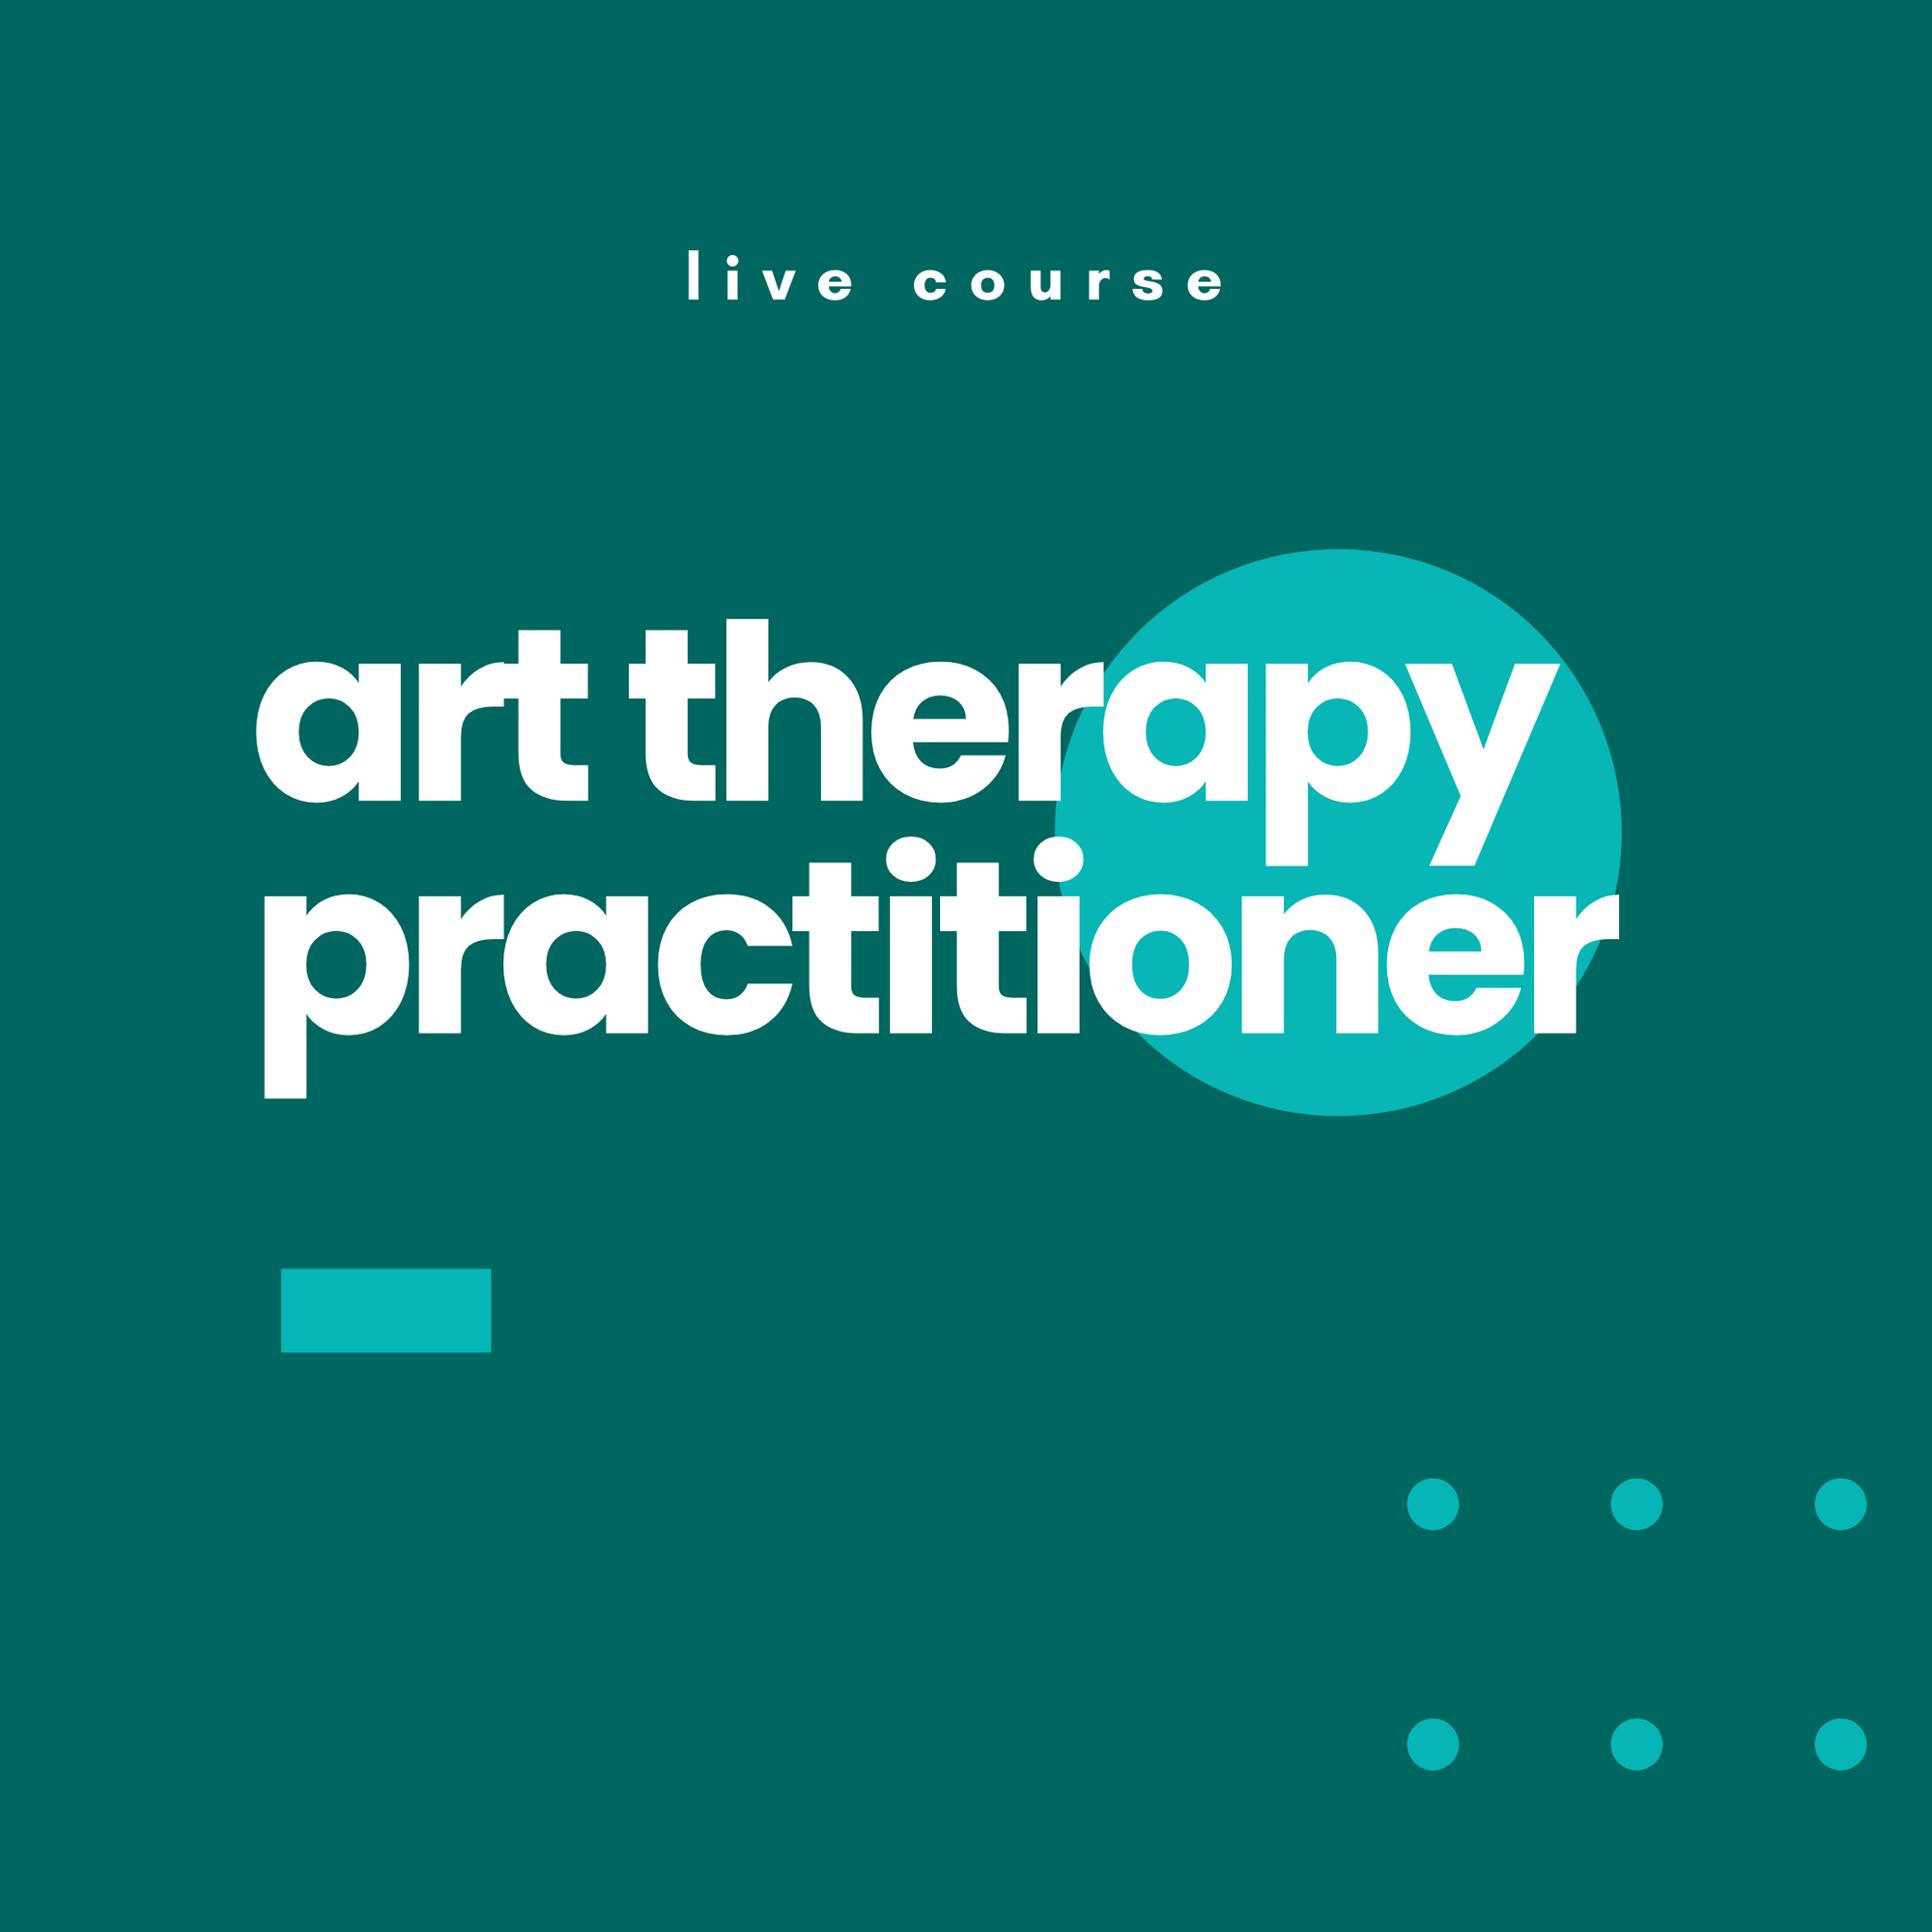 Art Therapy Practitioner Course